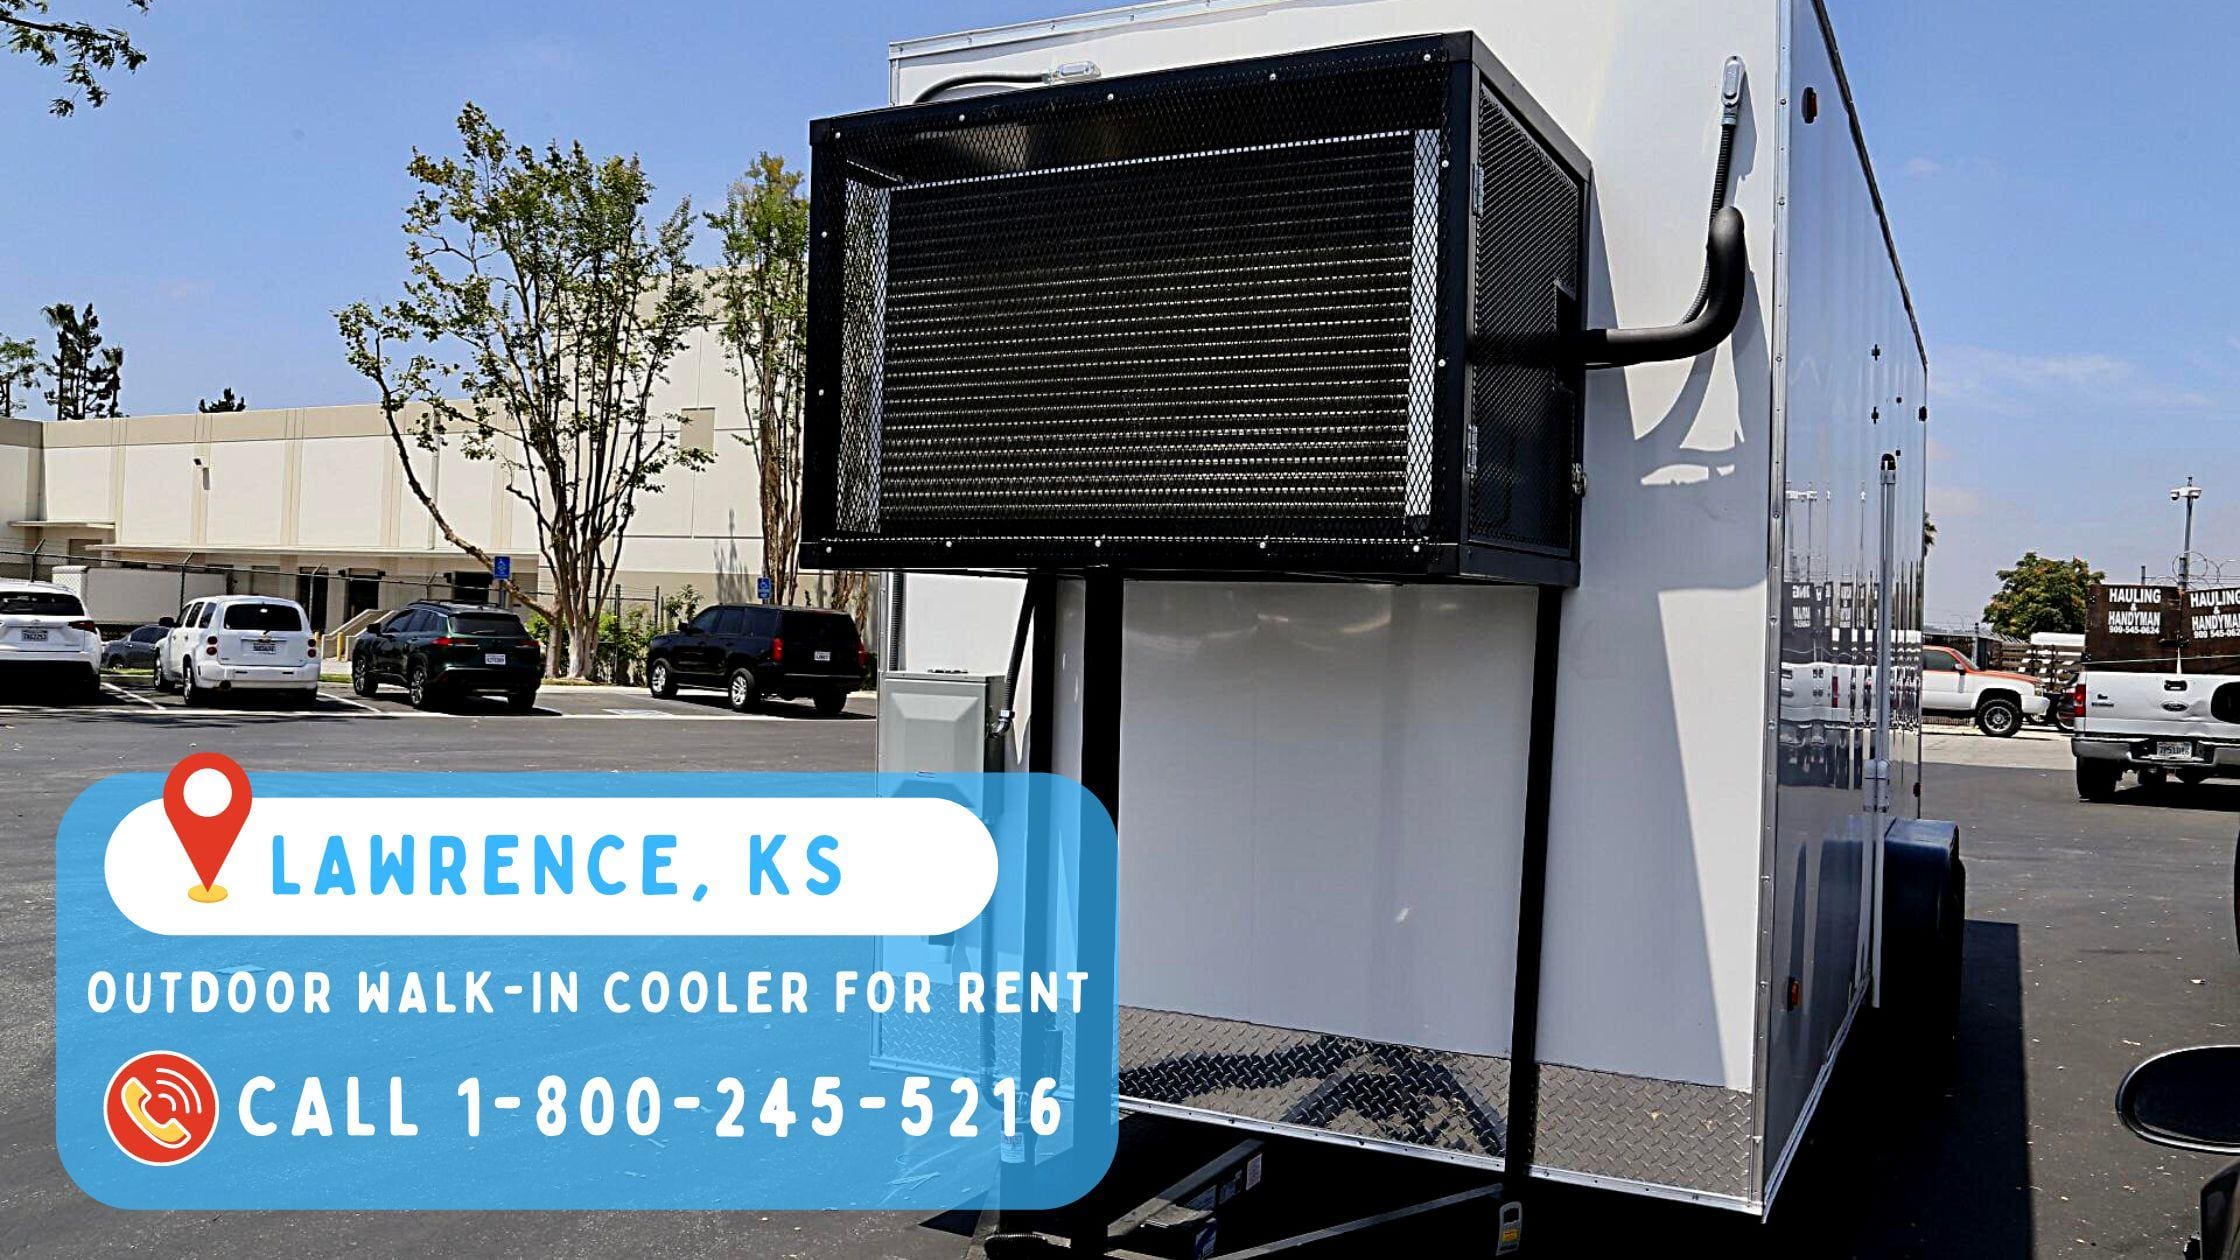 Outdoor Walk-in Cooler for Rent in Lawrence, KS